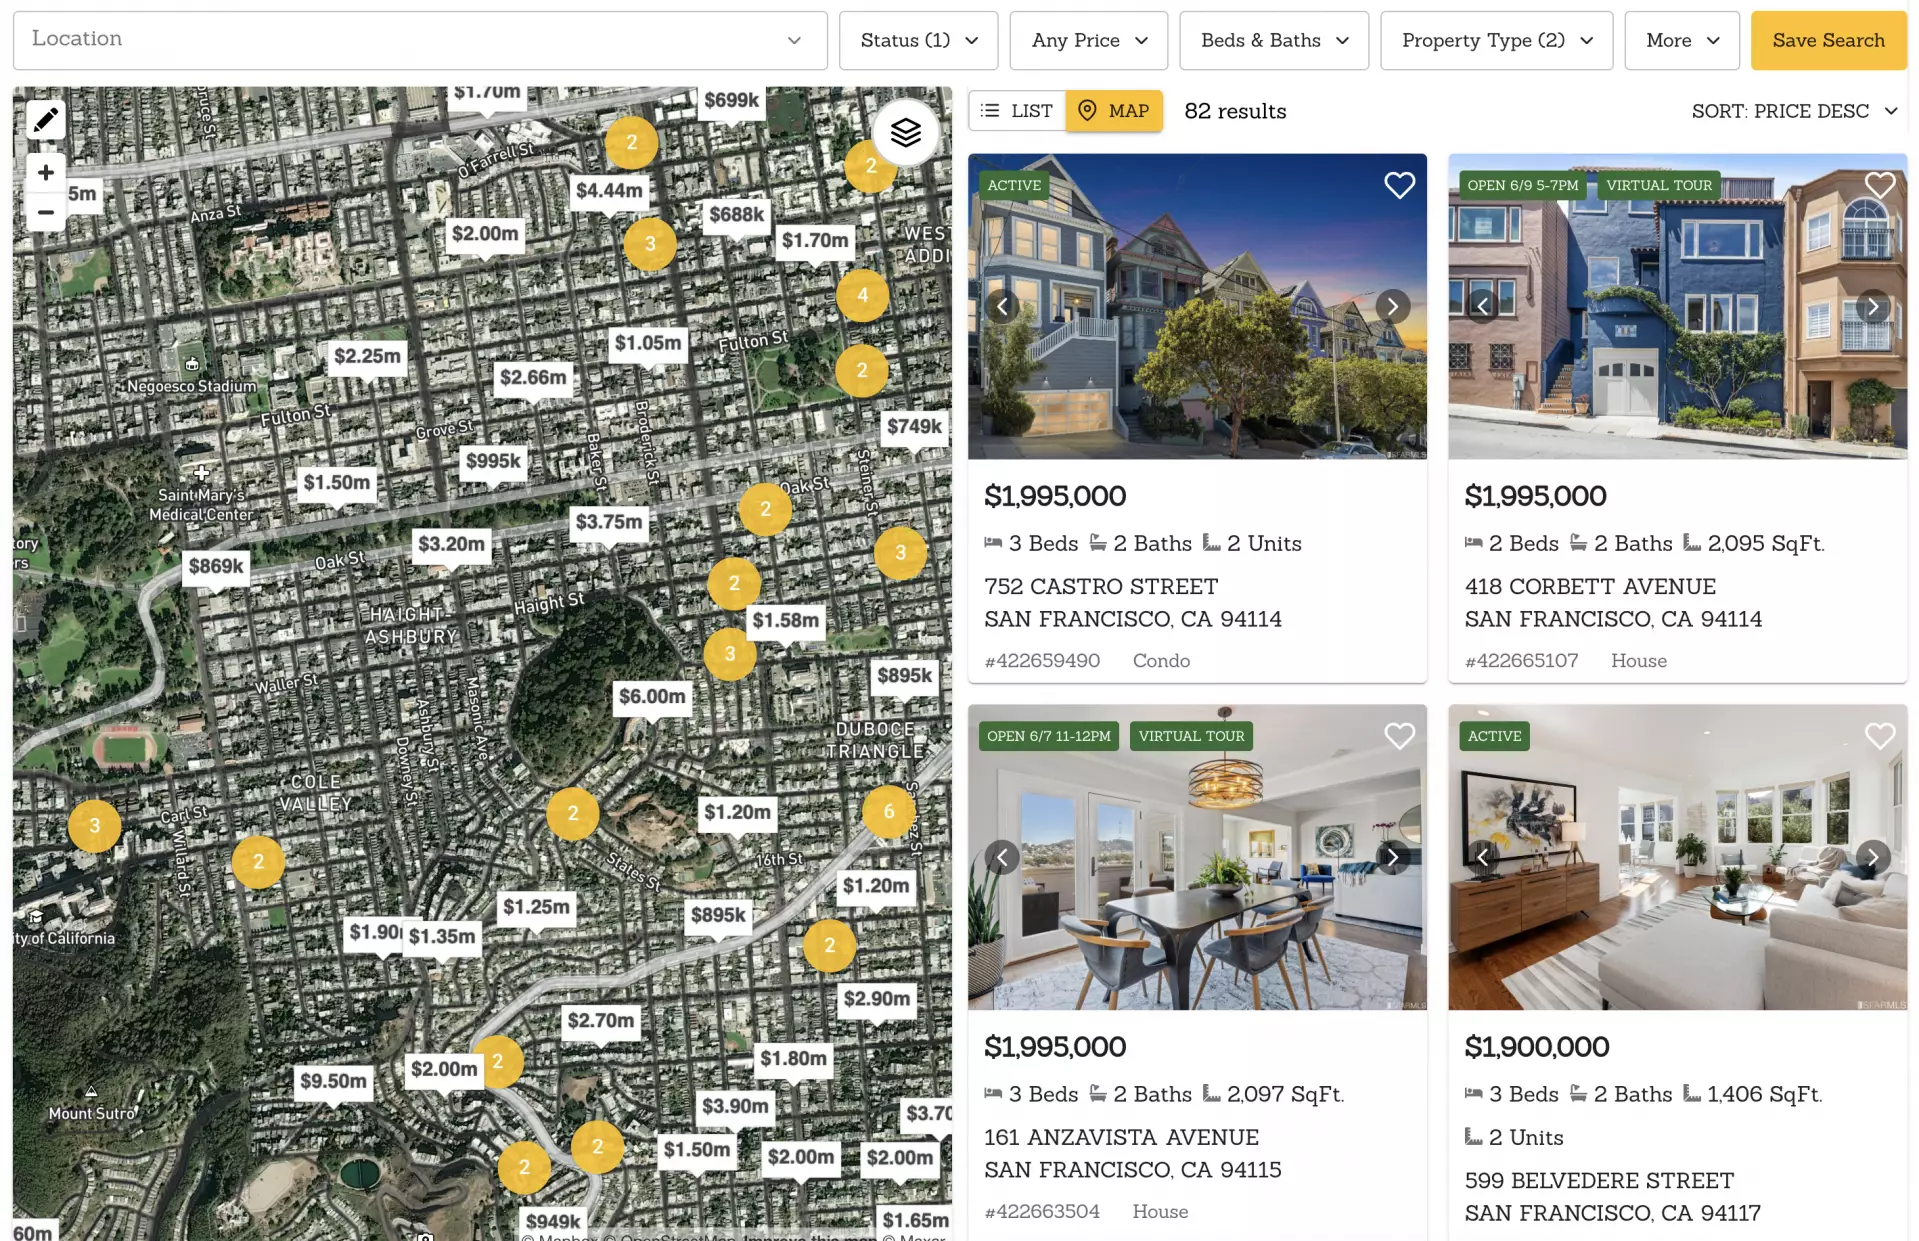 Another real estate-specific website builder is iHomeFinder. It is a great-looking site and offers nice tools that enable a fast, efficient process for looking up available homes for sale. As it makes the home 